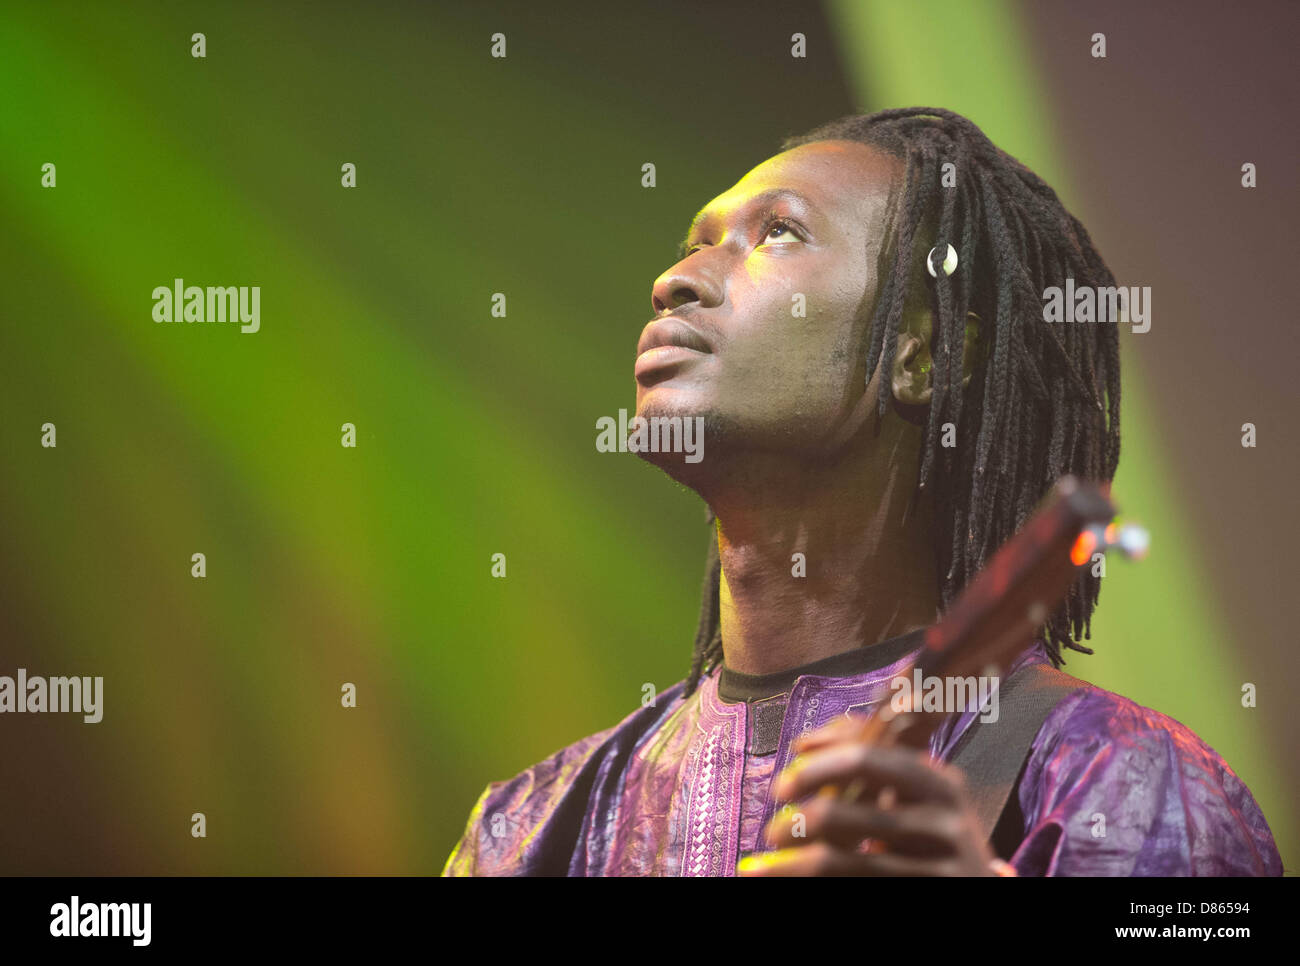 Bassekou Kouyate from Mali performs 'Jama Ko' with Ngoni ba at Moers Festival in Moers, Germany, 20 May 2013. Photo: Bernd Thissen Stock Photo